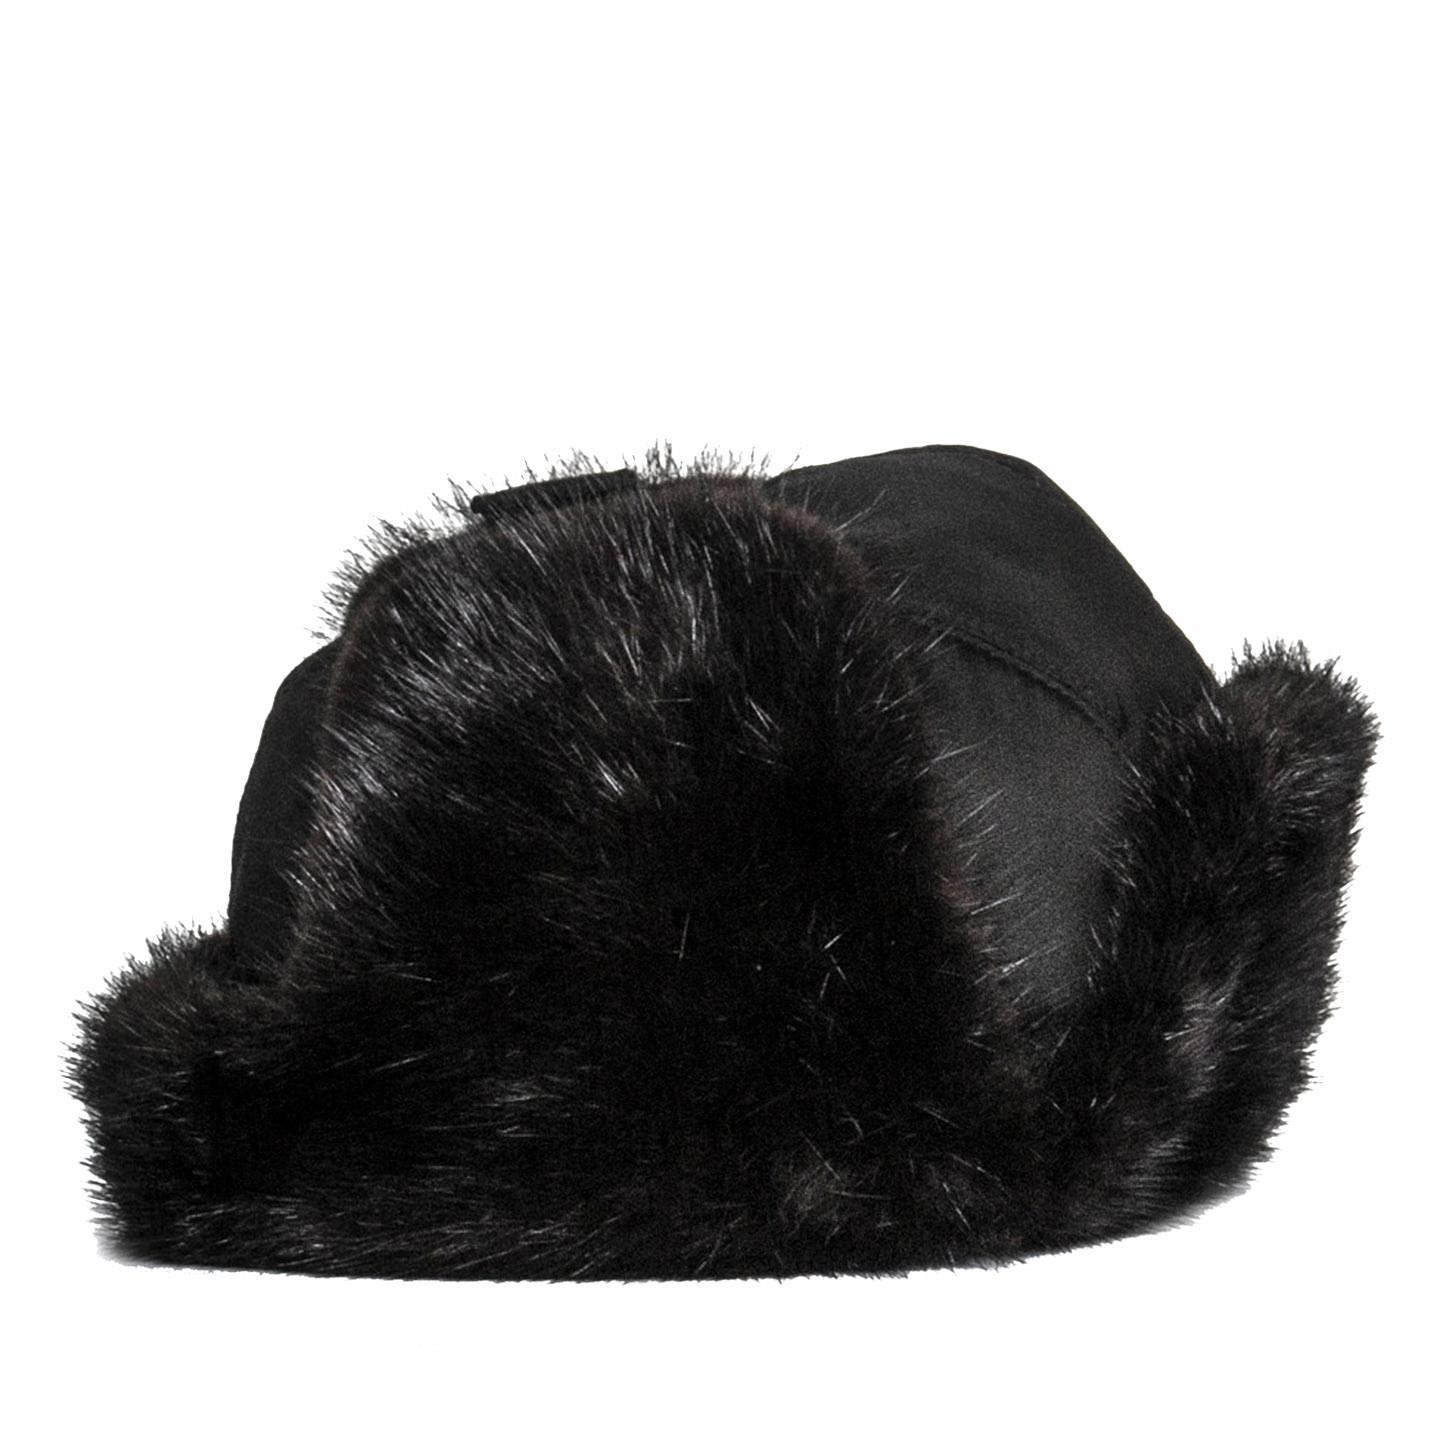 Prada Black Mink & Nylon Cap In Excellent Condition For Sale In Brooklyn, NY